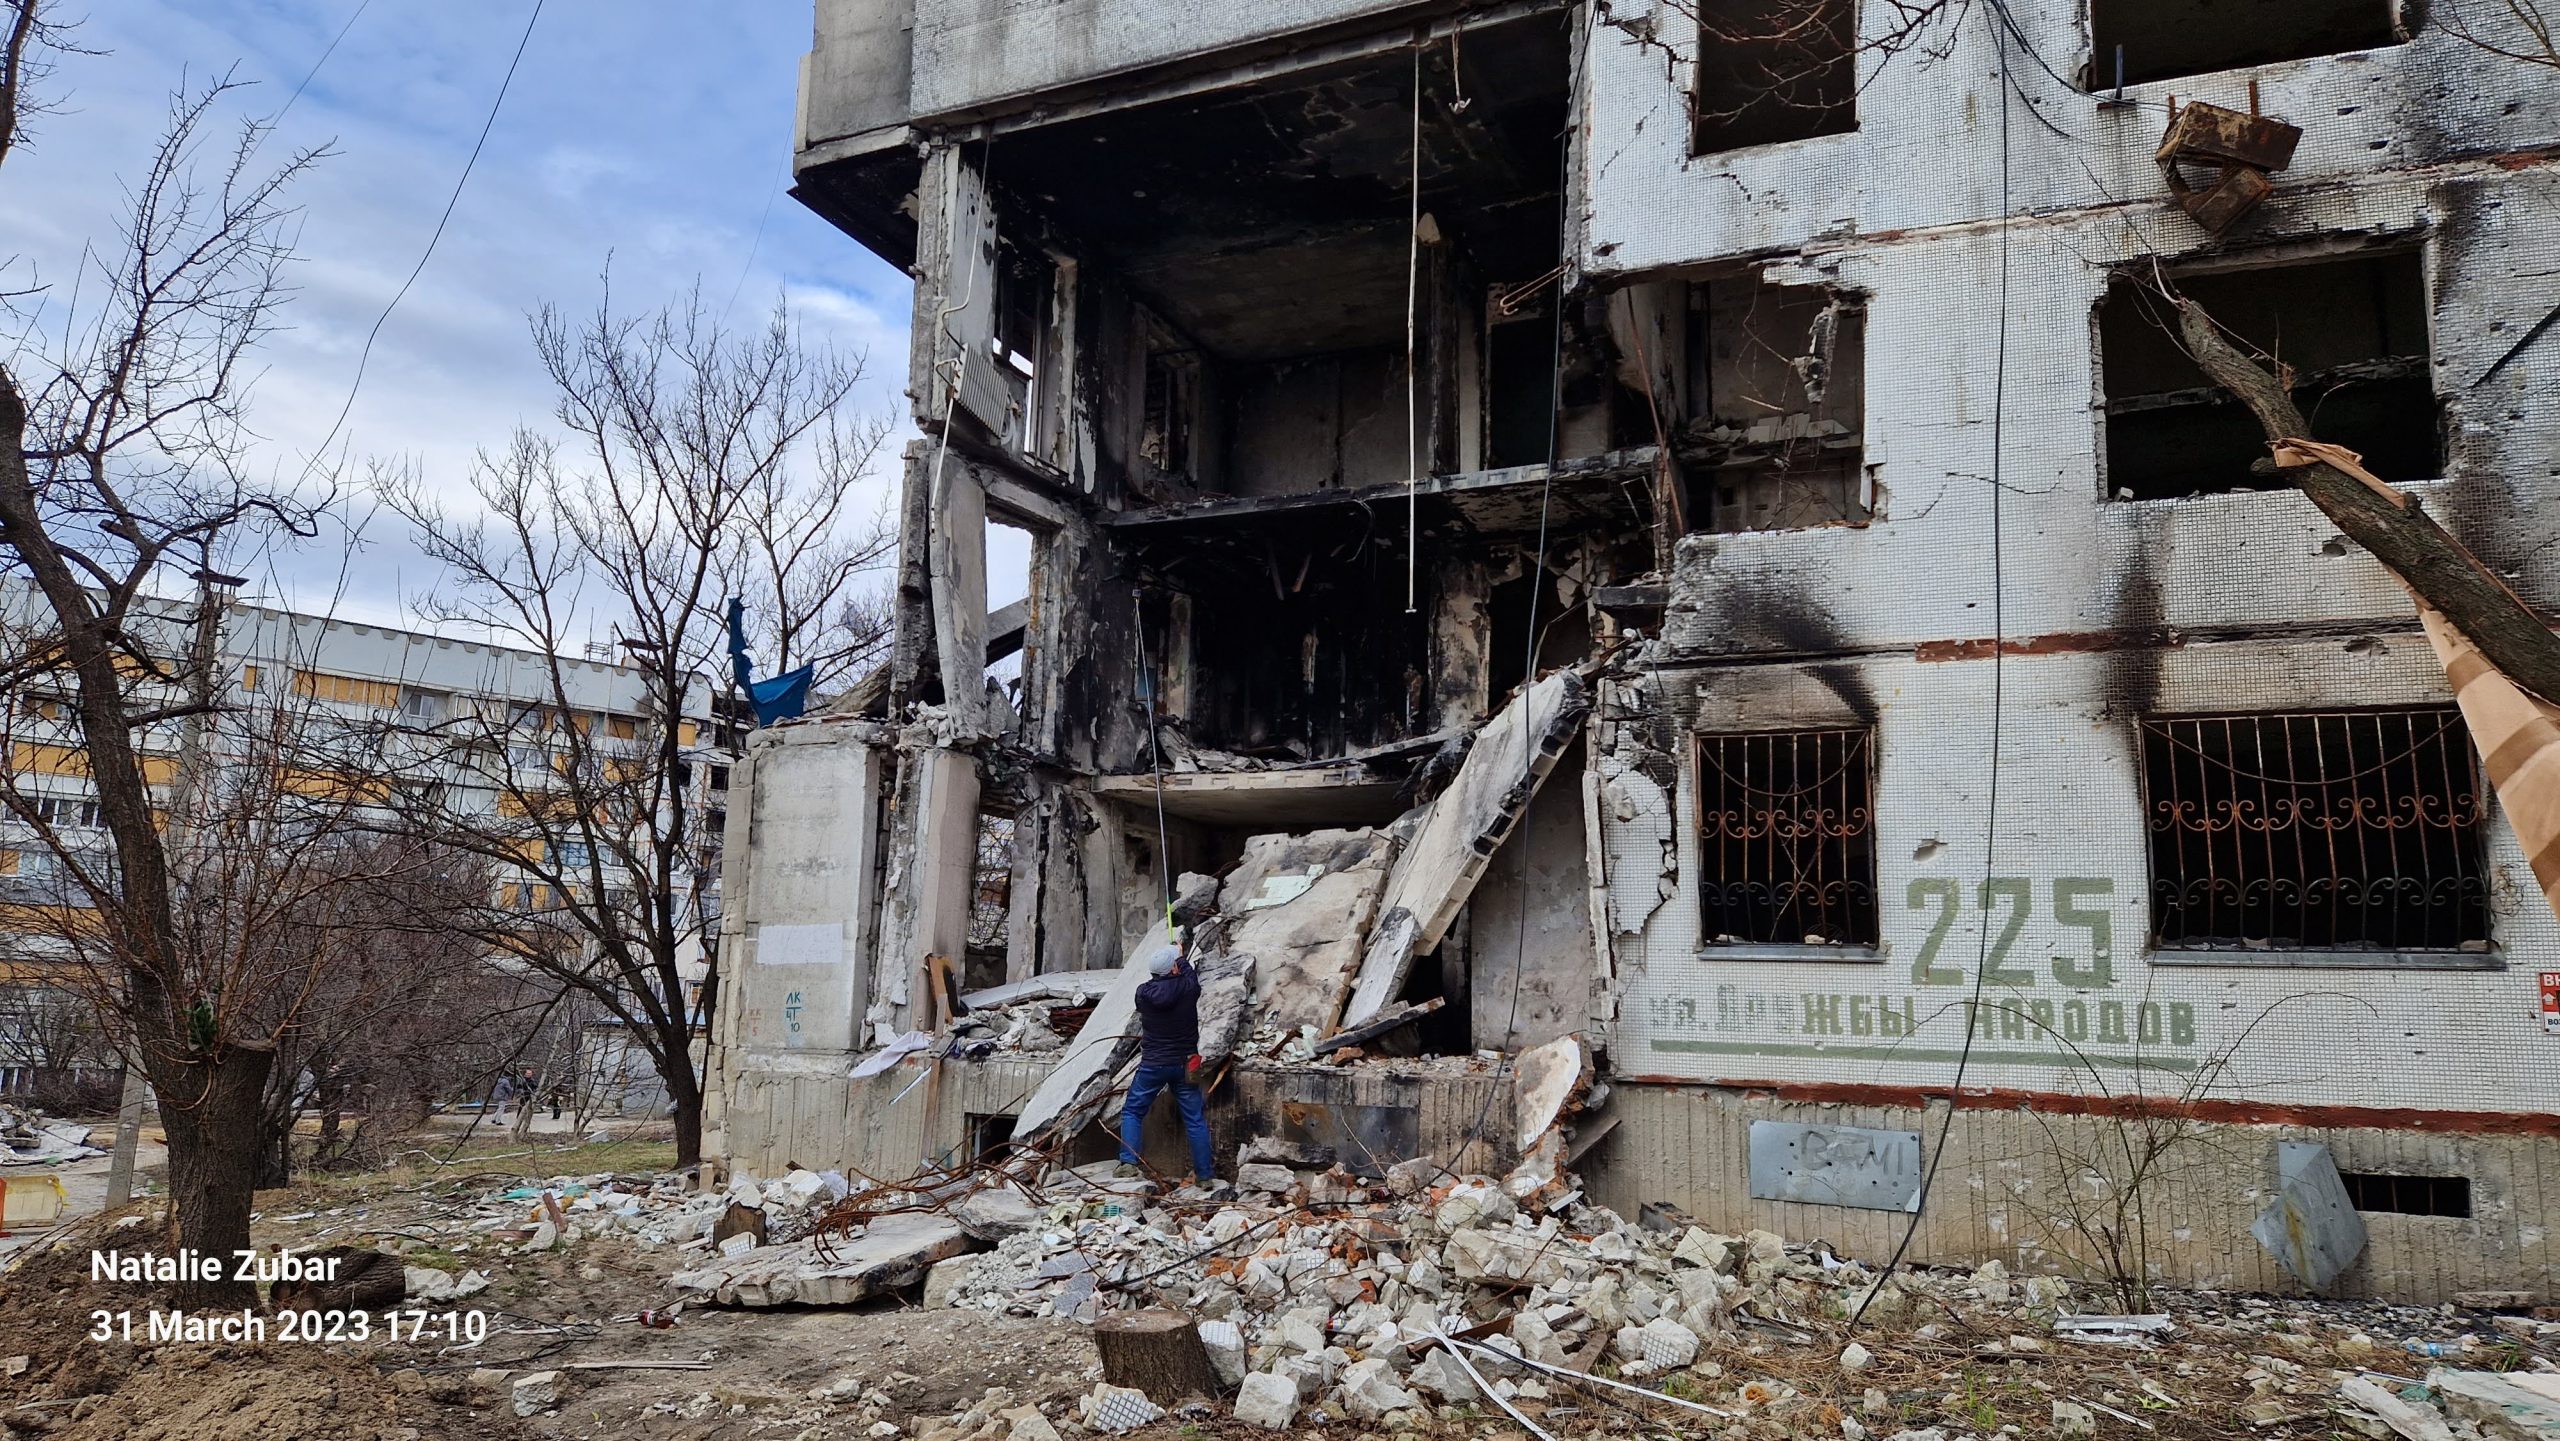 A destroyed apartment building in North Saltivka, Kharkiv with the remnants of the address on the wall, which is translated as "Friendship of the Peoples Street #225". Photo was taken on March 31, 2023 by Nataliya Zubar.